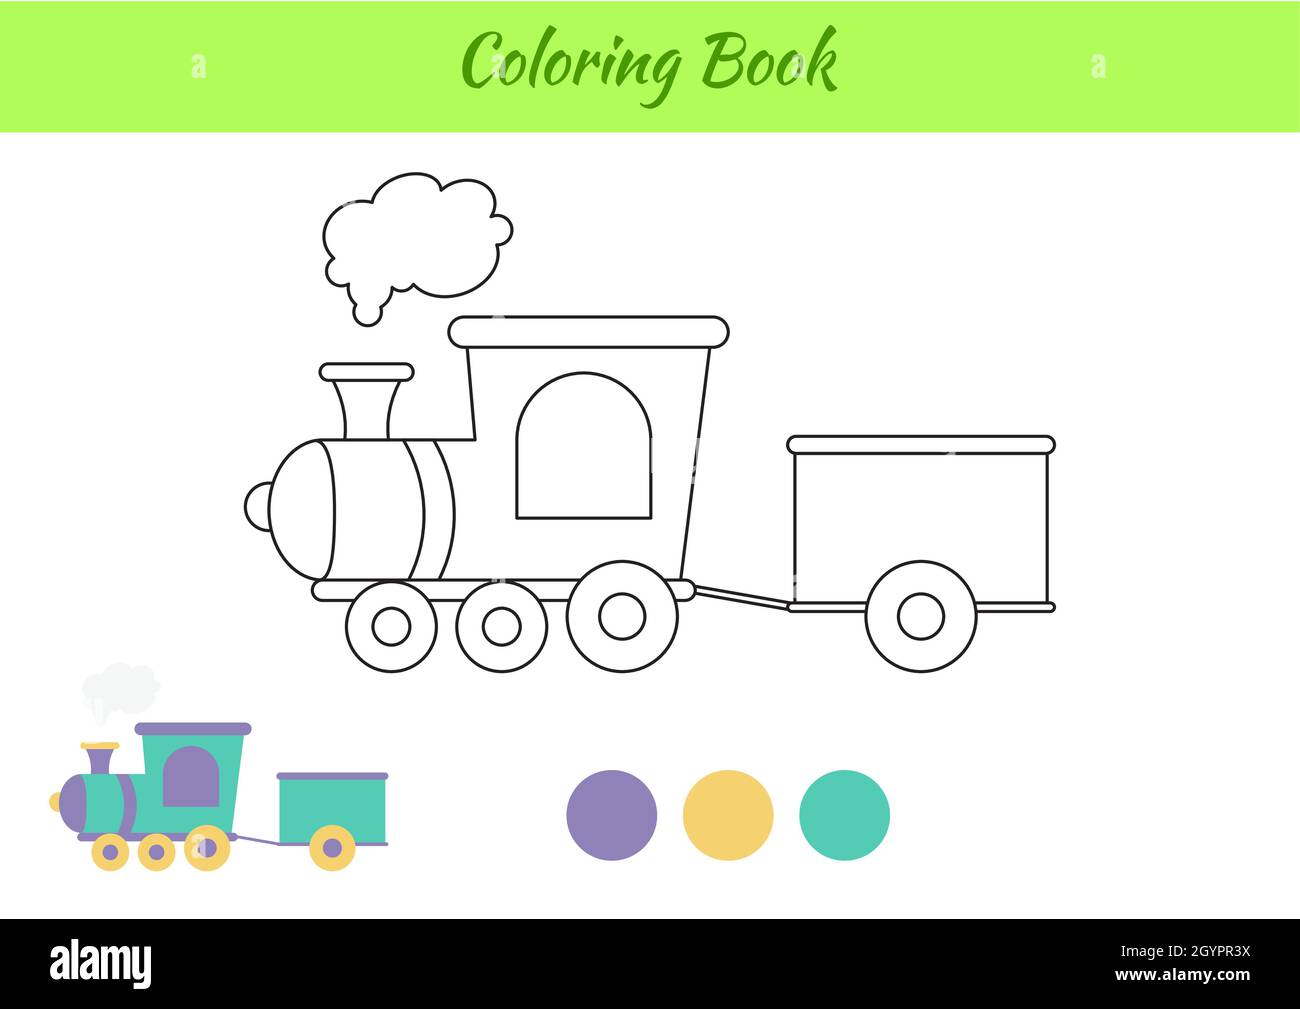 Coloring book train for children educational activity page for preschool years kids and toddlers with transport printable worksheet cartoon colorfu stock vector image art